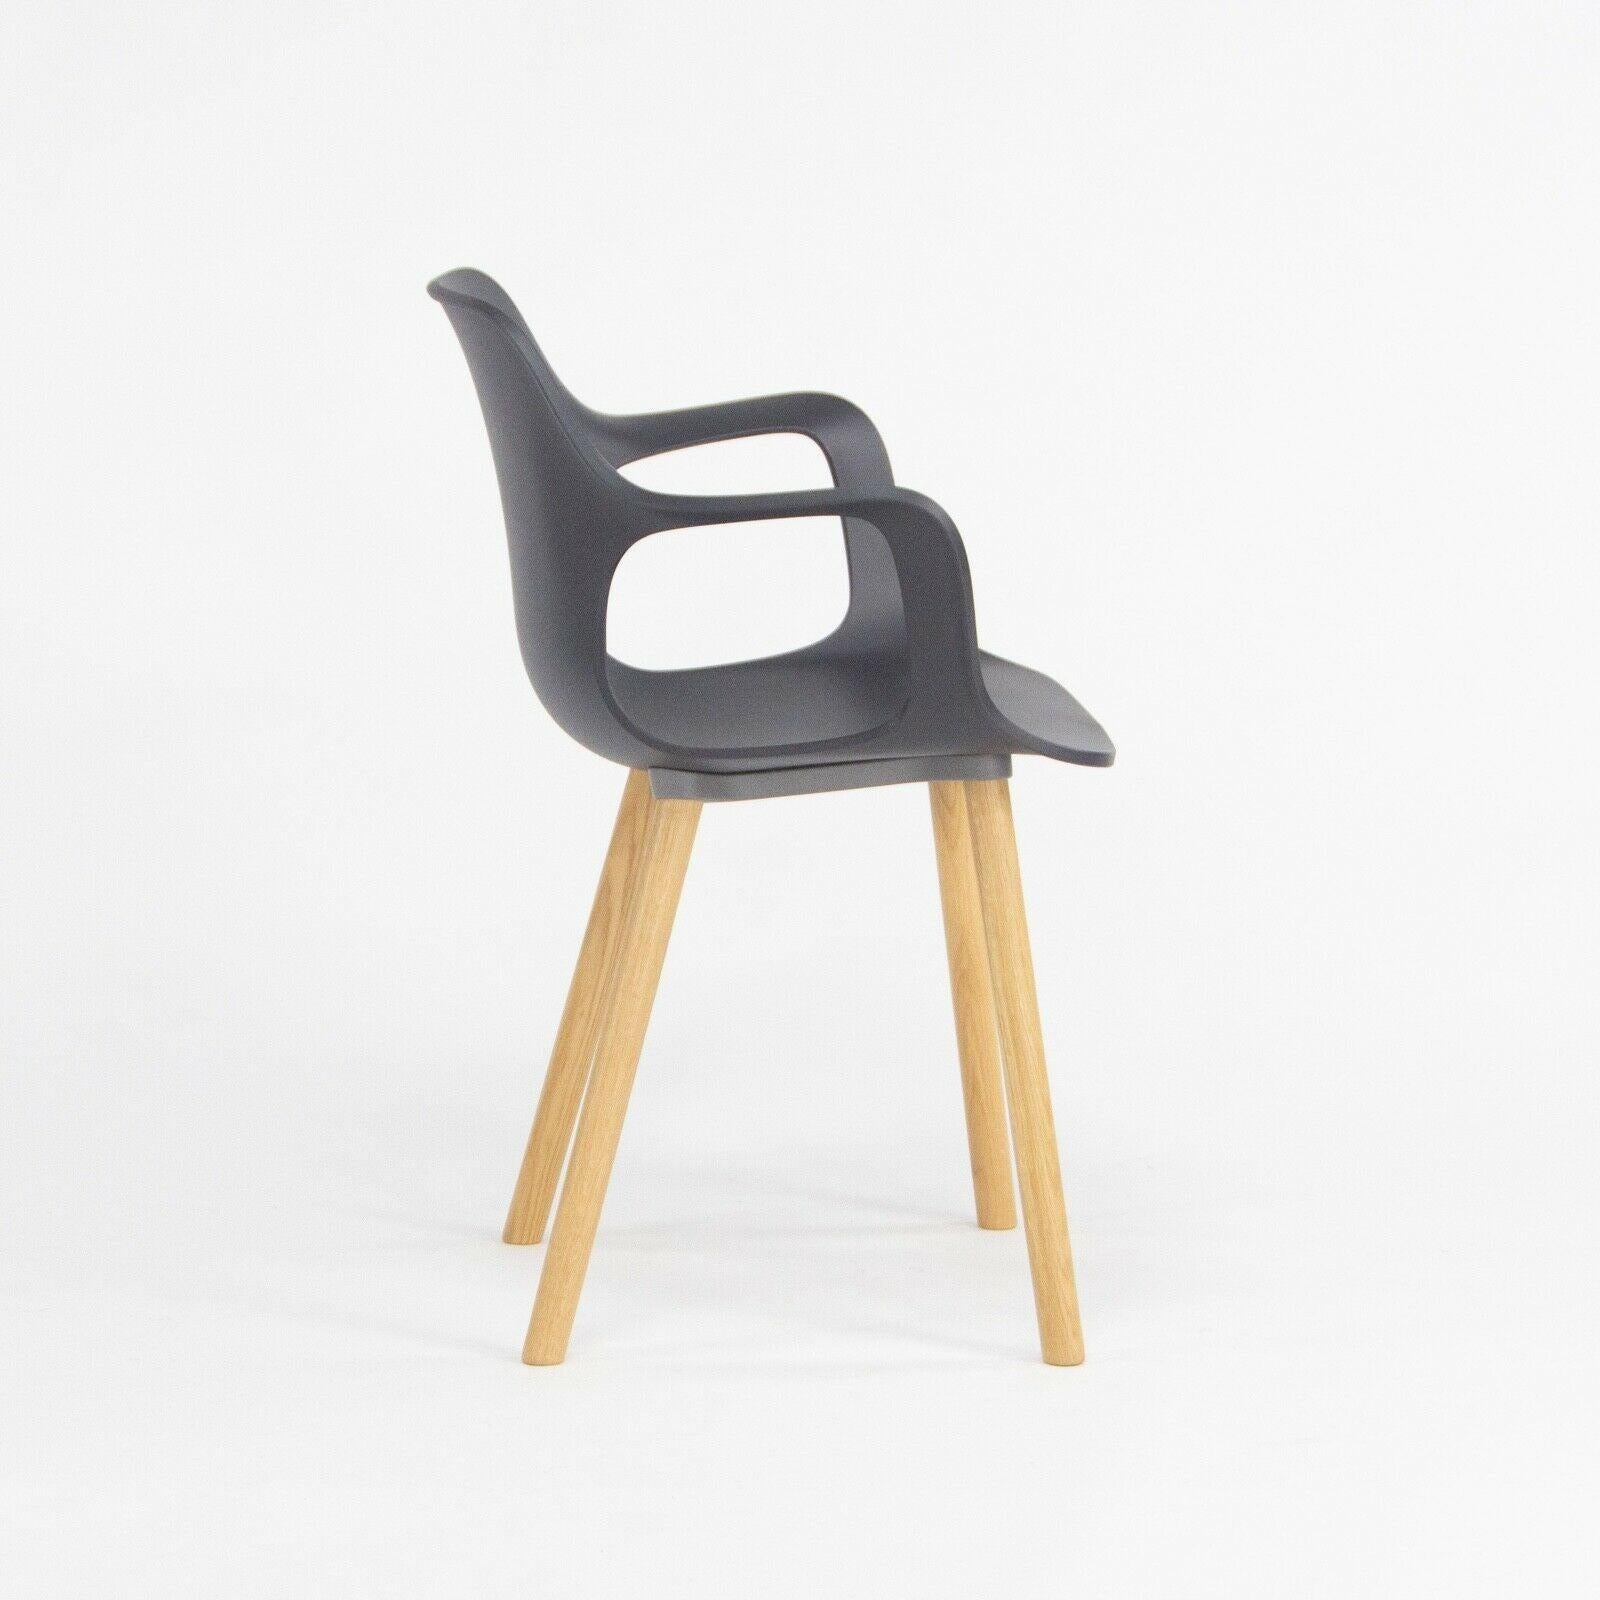 2018 Jasper Morrison for Vitra HAL Armchair with Black Seat and Oak Wood Legs In Good Condition For Sale In Philadelphia, PA